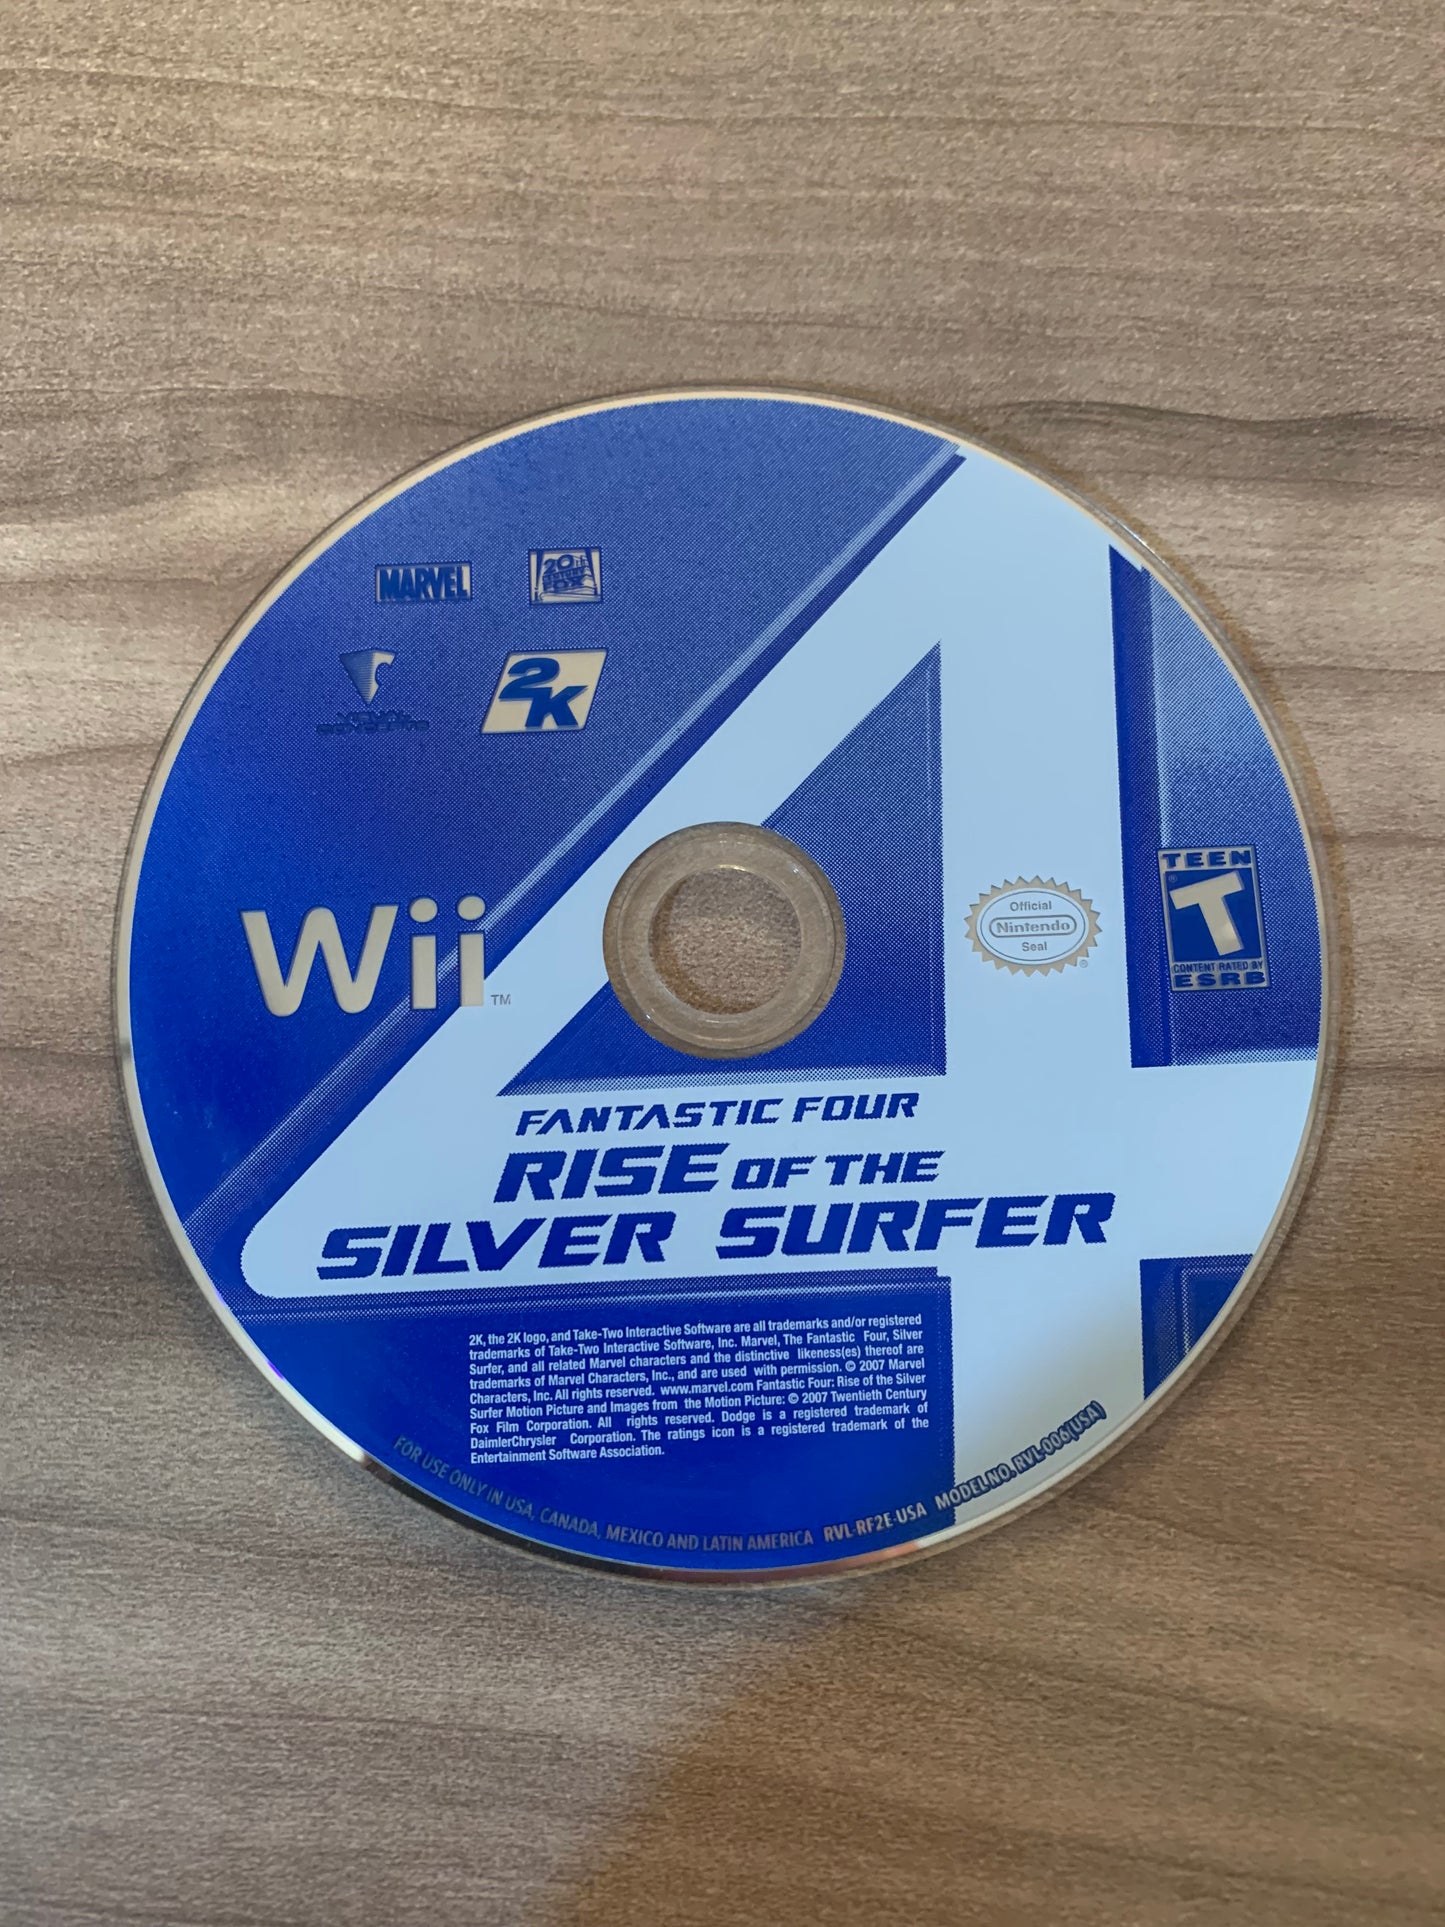 PiXEL-RETRO.COM : NINTENDO WII GAME NTSC FANTASTIC FOUR RISE OF THE SILVER SURFER